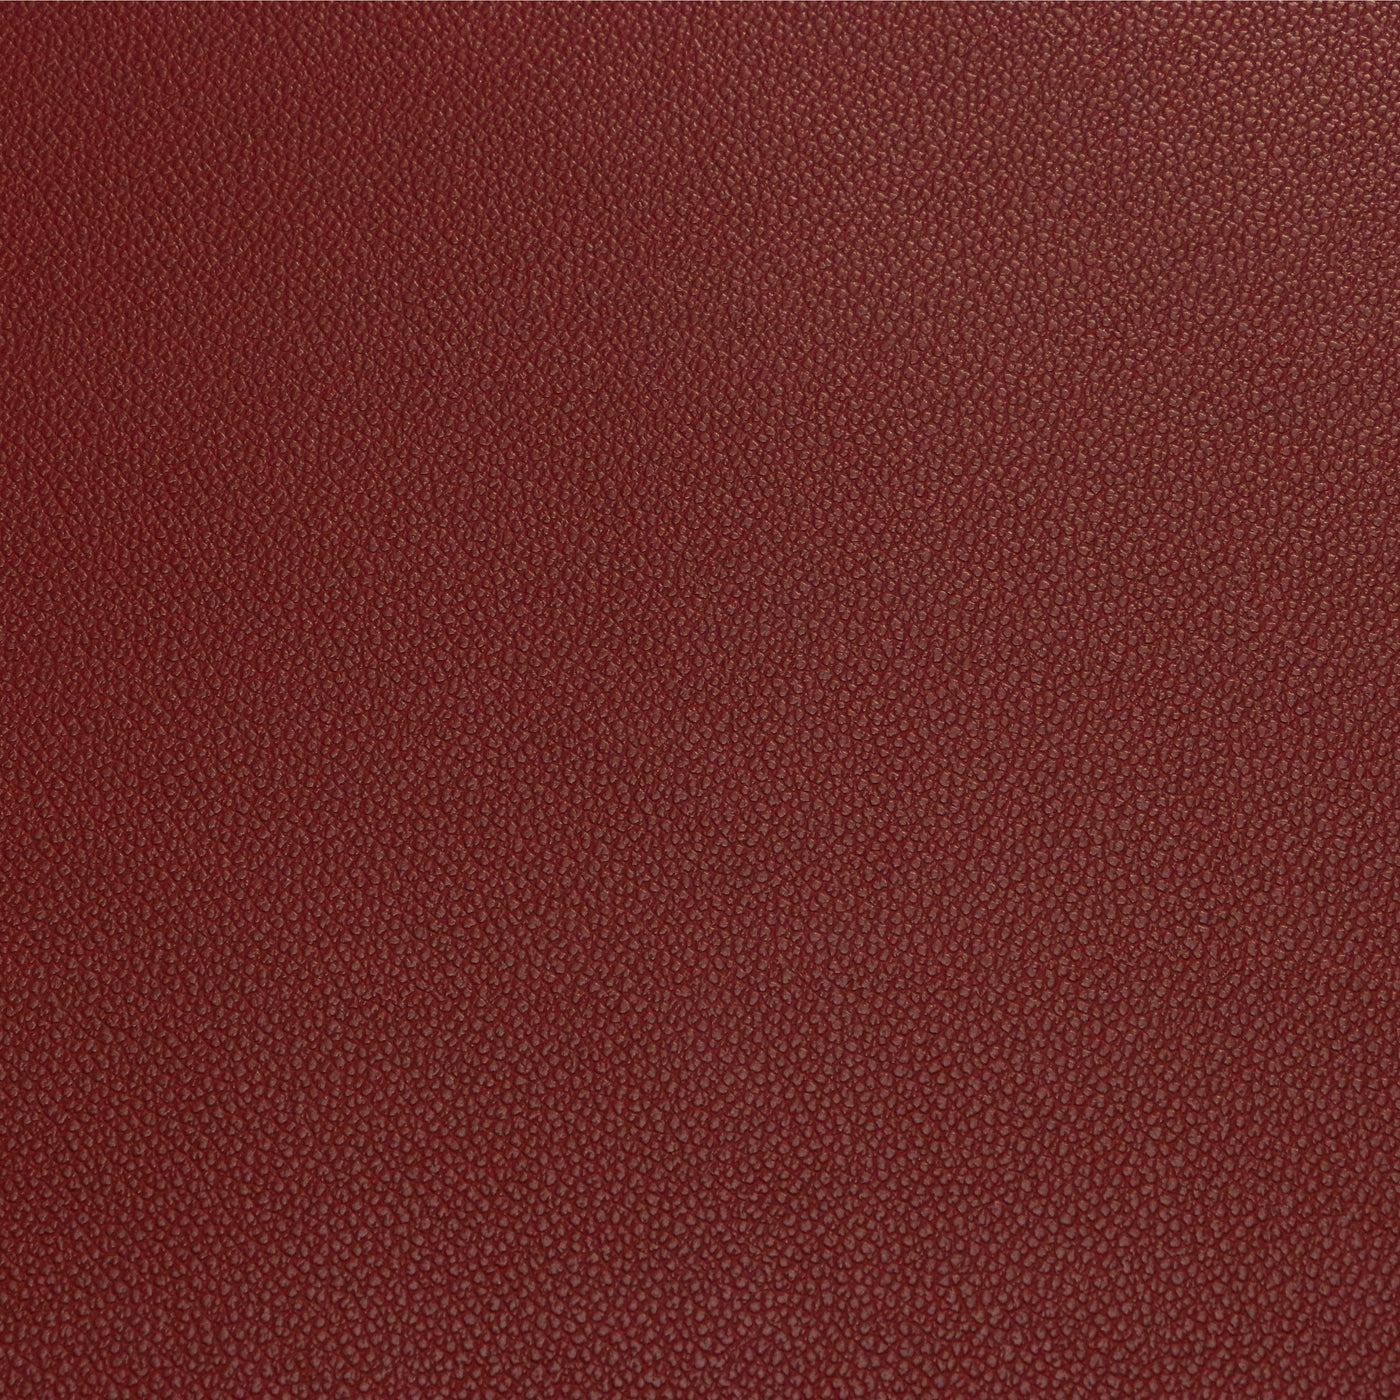 Packaged 1/2 Yard Cut: Cherry Pebble Faux Leather